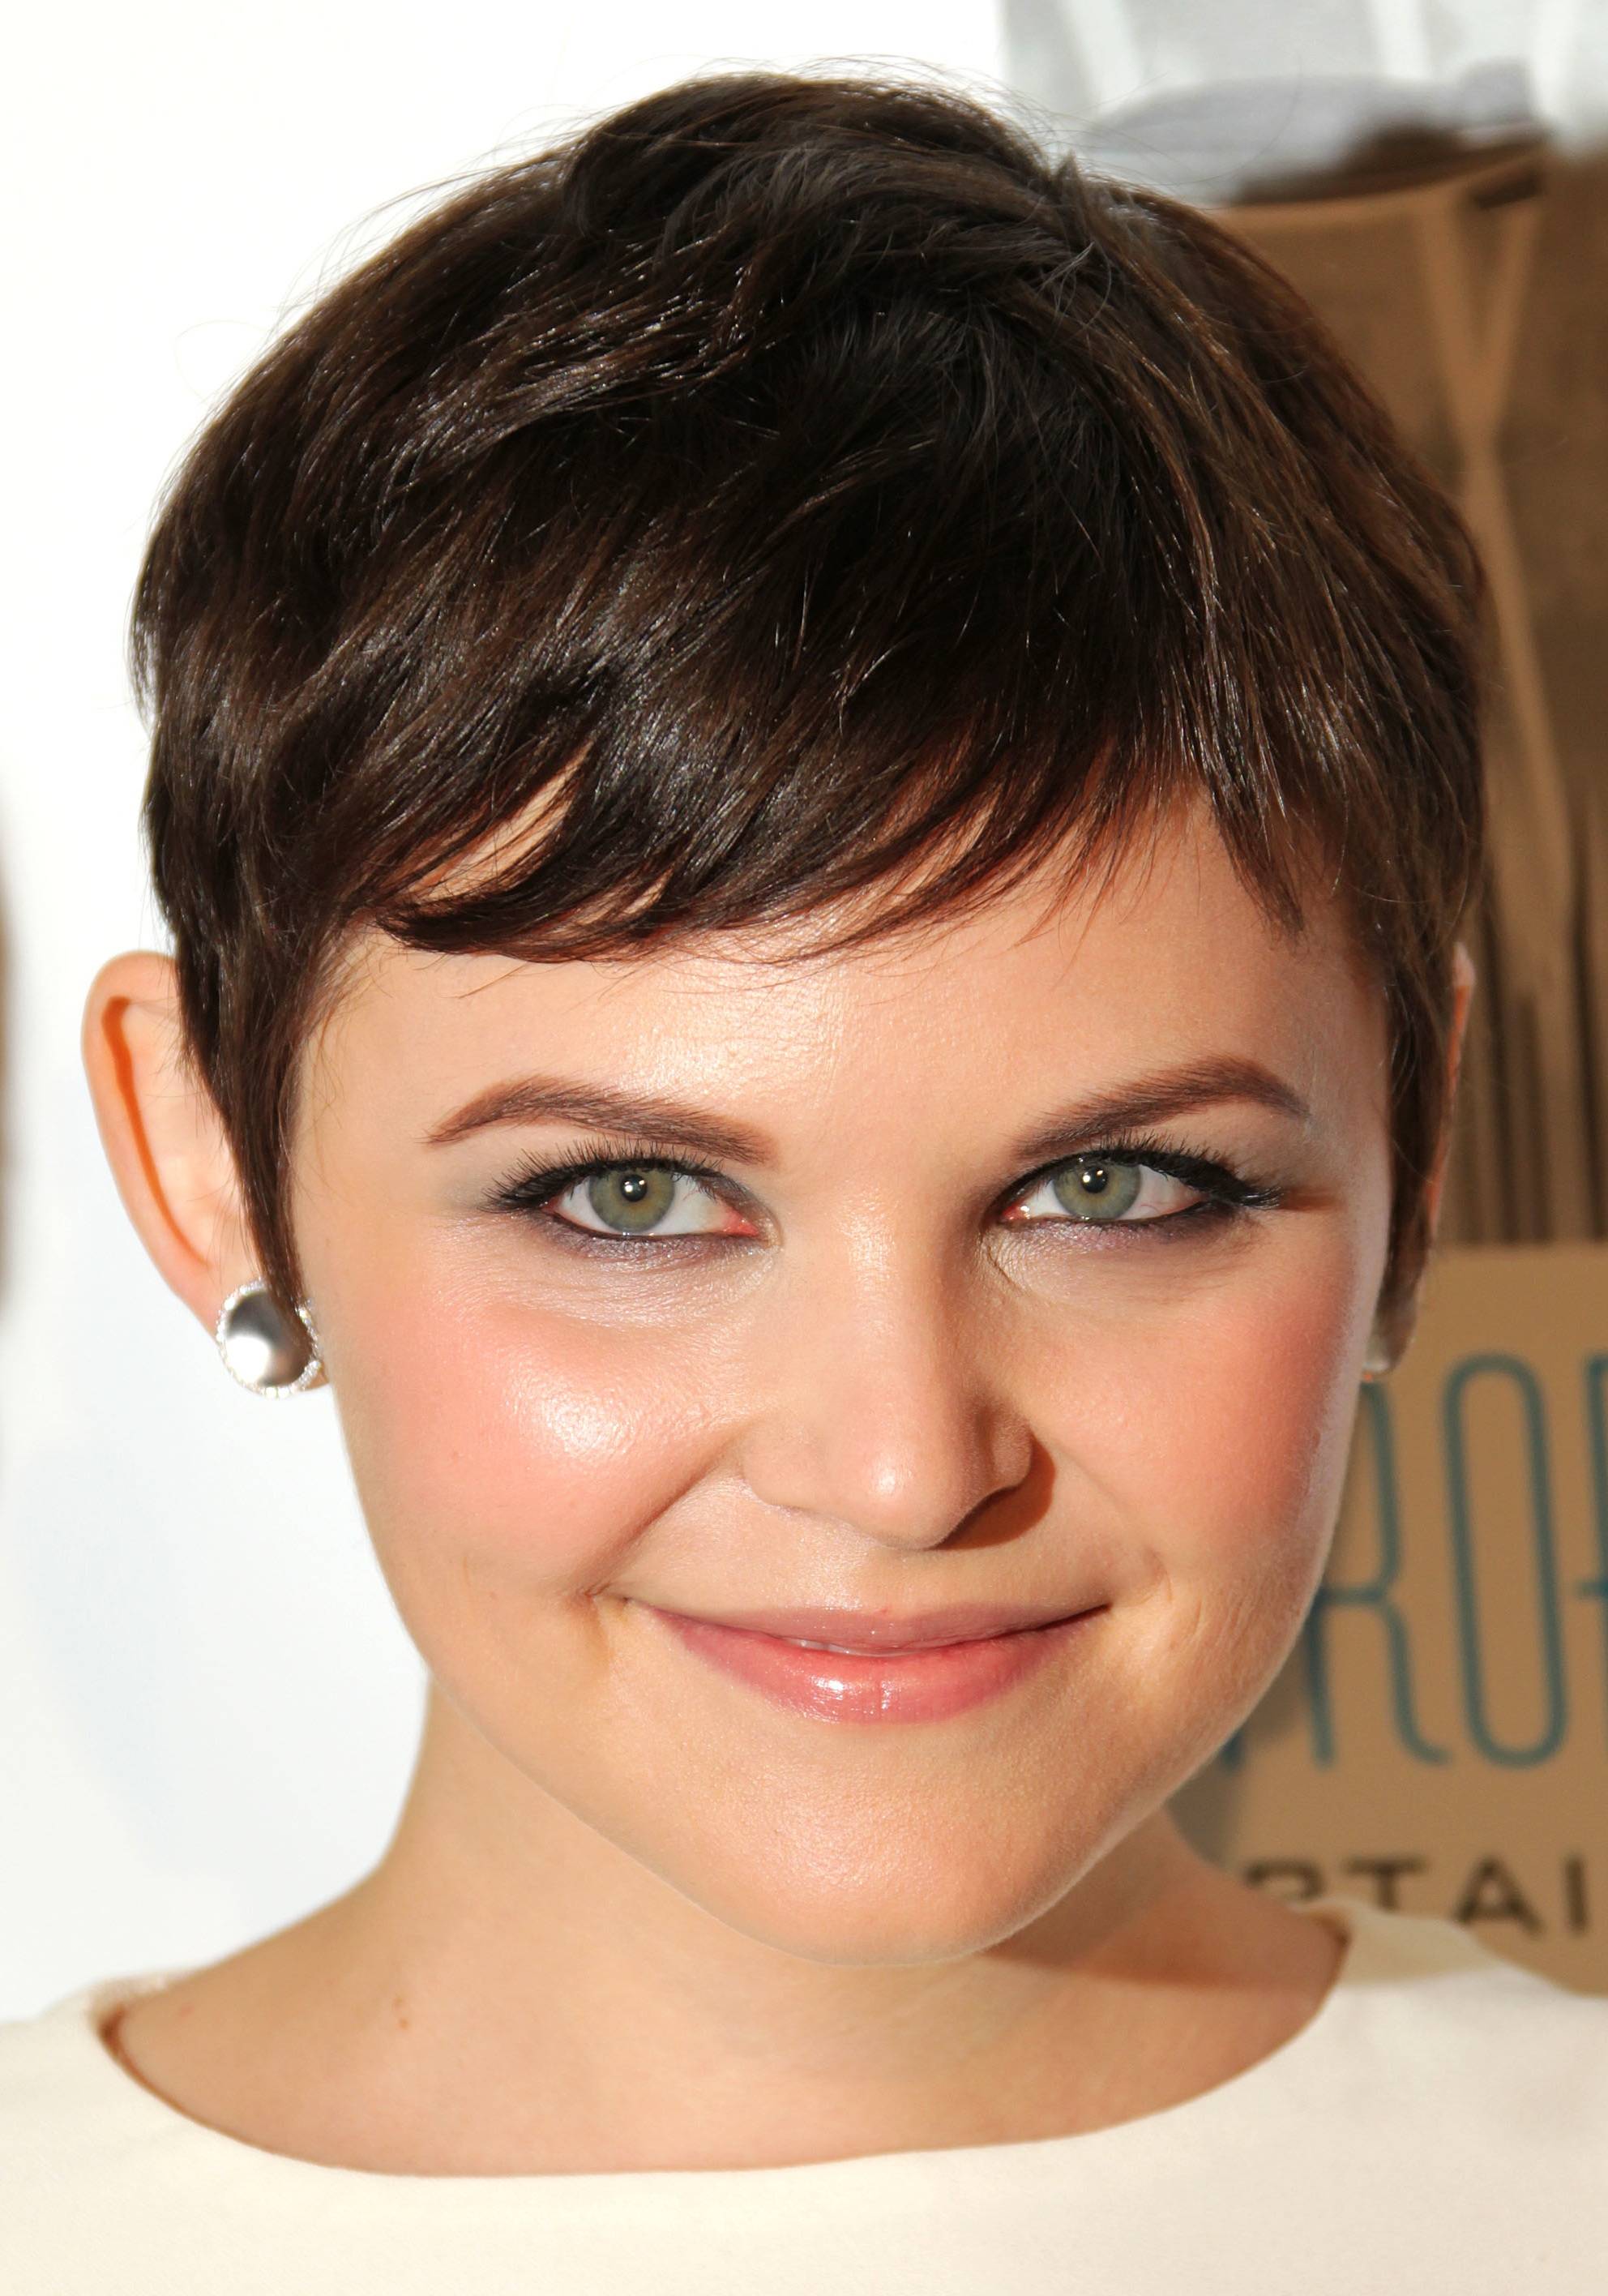 BEVERLY HILLS, CA - OCTOBER 08:  Actress Ginnifer Goodwin attends the Sixth annual Gay and Lesbian and Straight Education Network Respect Awards at the Beverly Hills Hotel on October 8, 2010 in Beverly Hills, California.  (Photo by Frederick M. Brown/Getty Images)